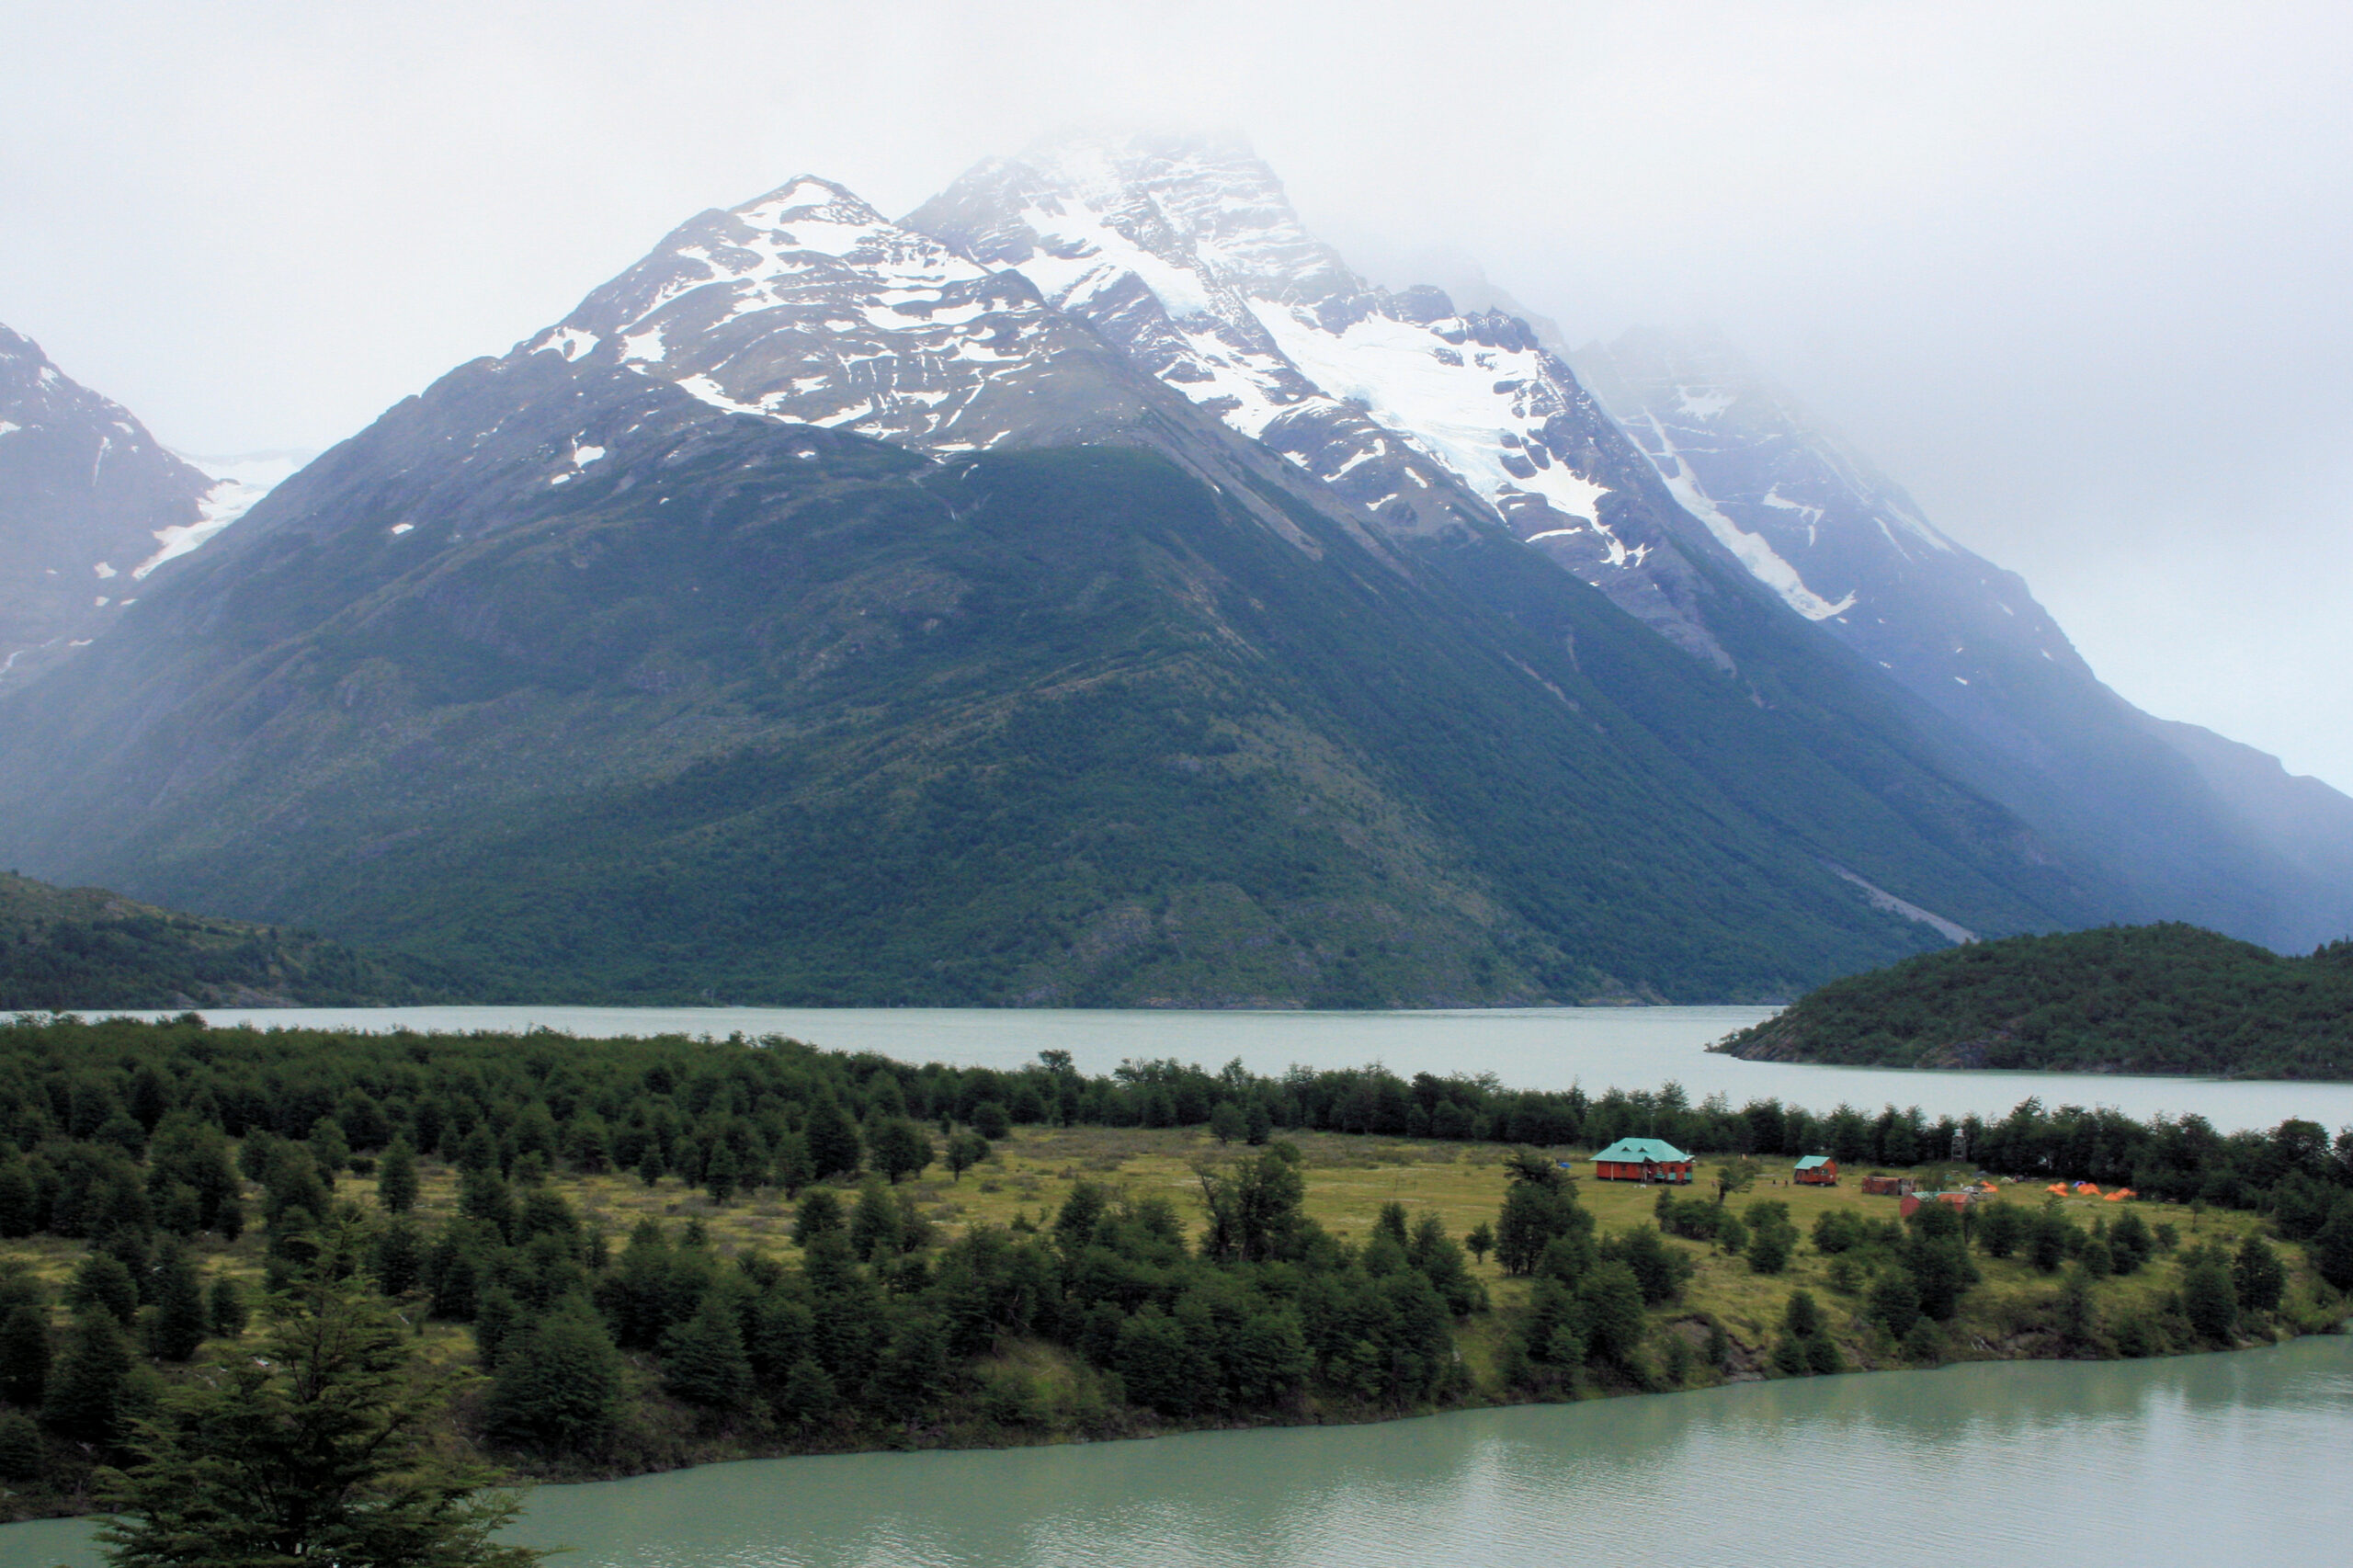 Mountains shrouded in fog behind Refugio Lago Paine in Chilean Patagonia&#039;s Torres del Paine National Park.